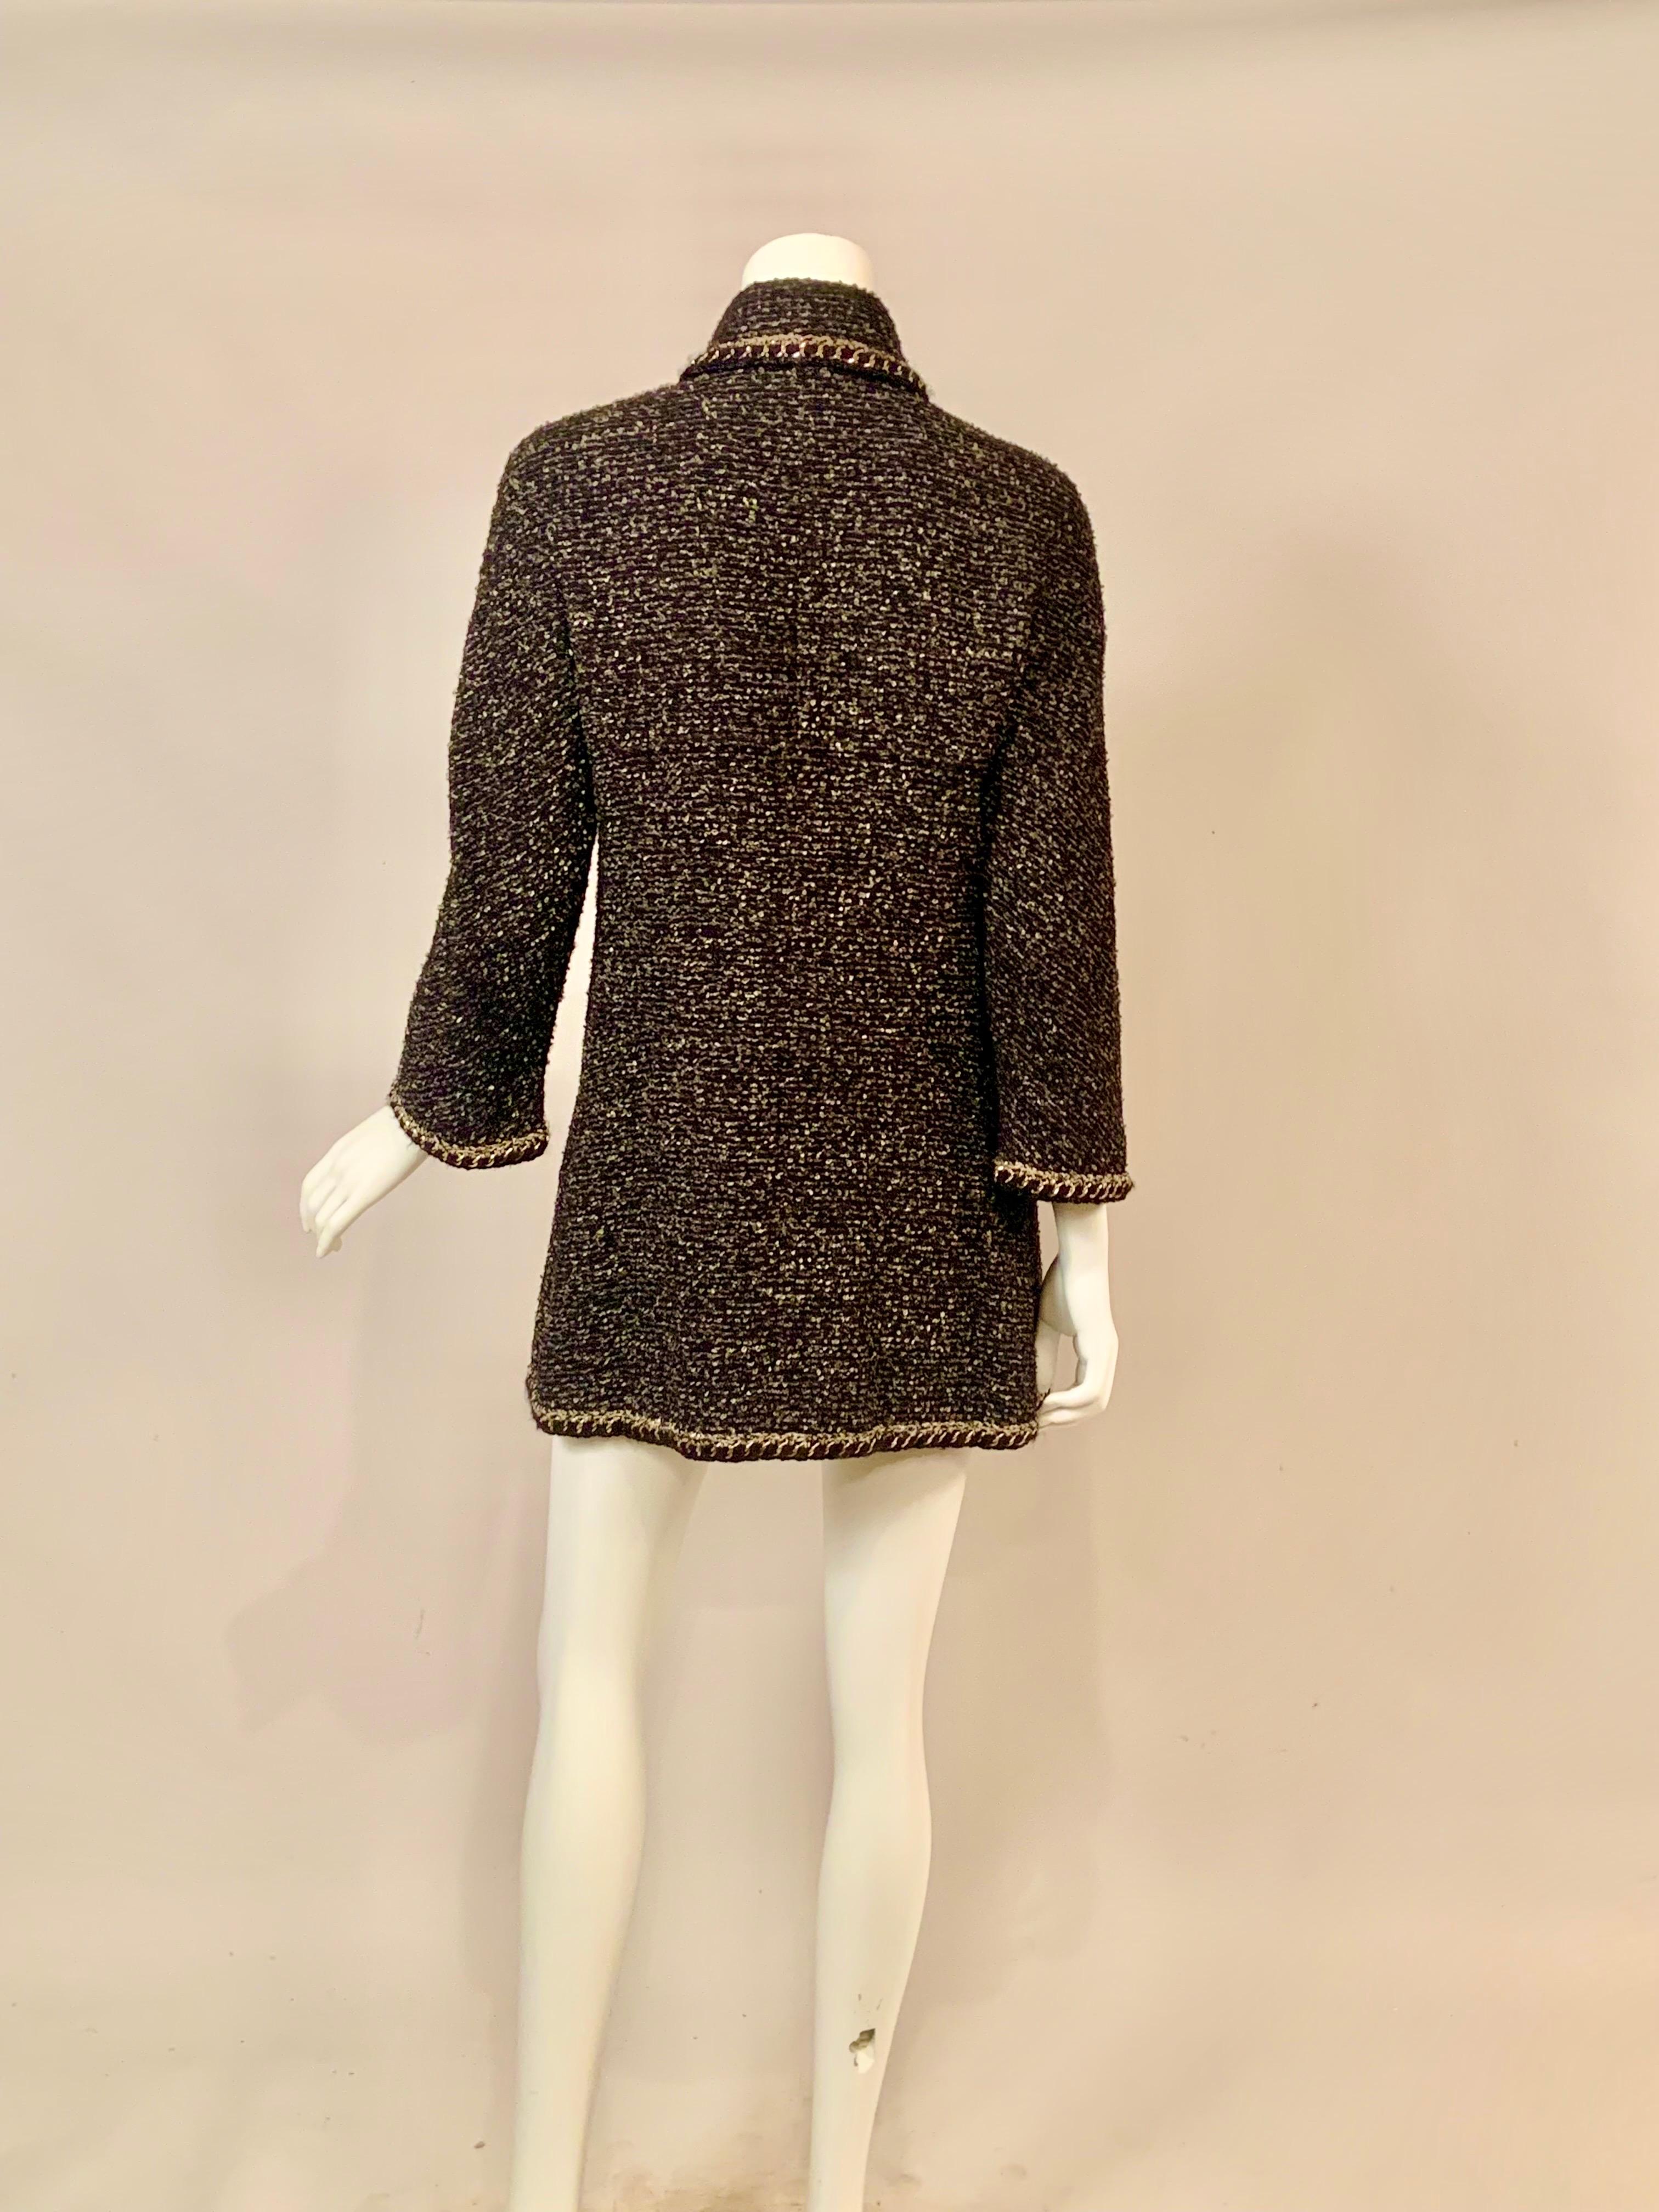 Chanel Chain Trimmed Black and Cream Tweed Jacket or Short Coat 4